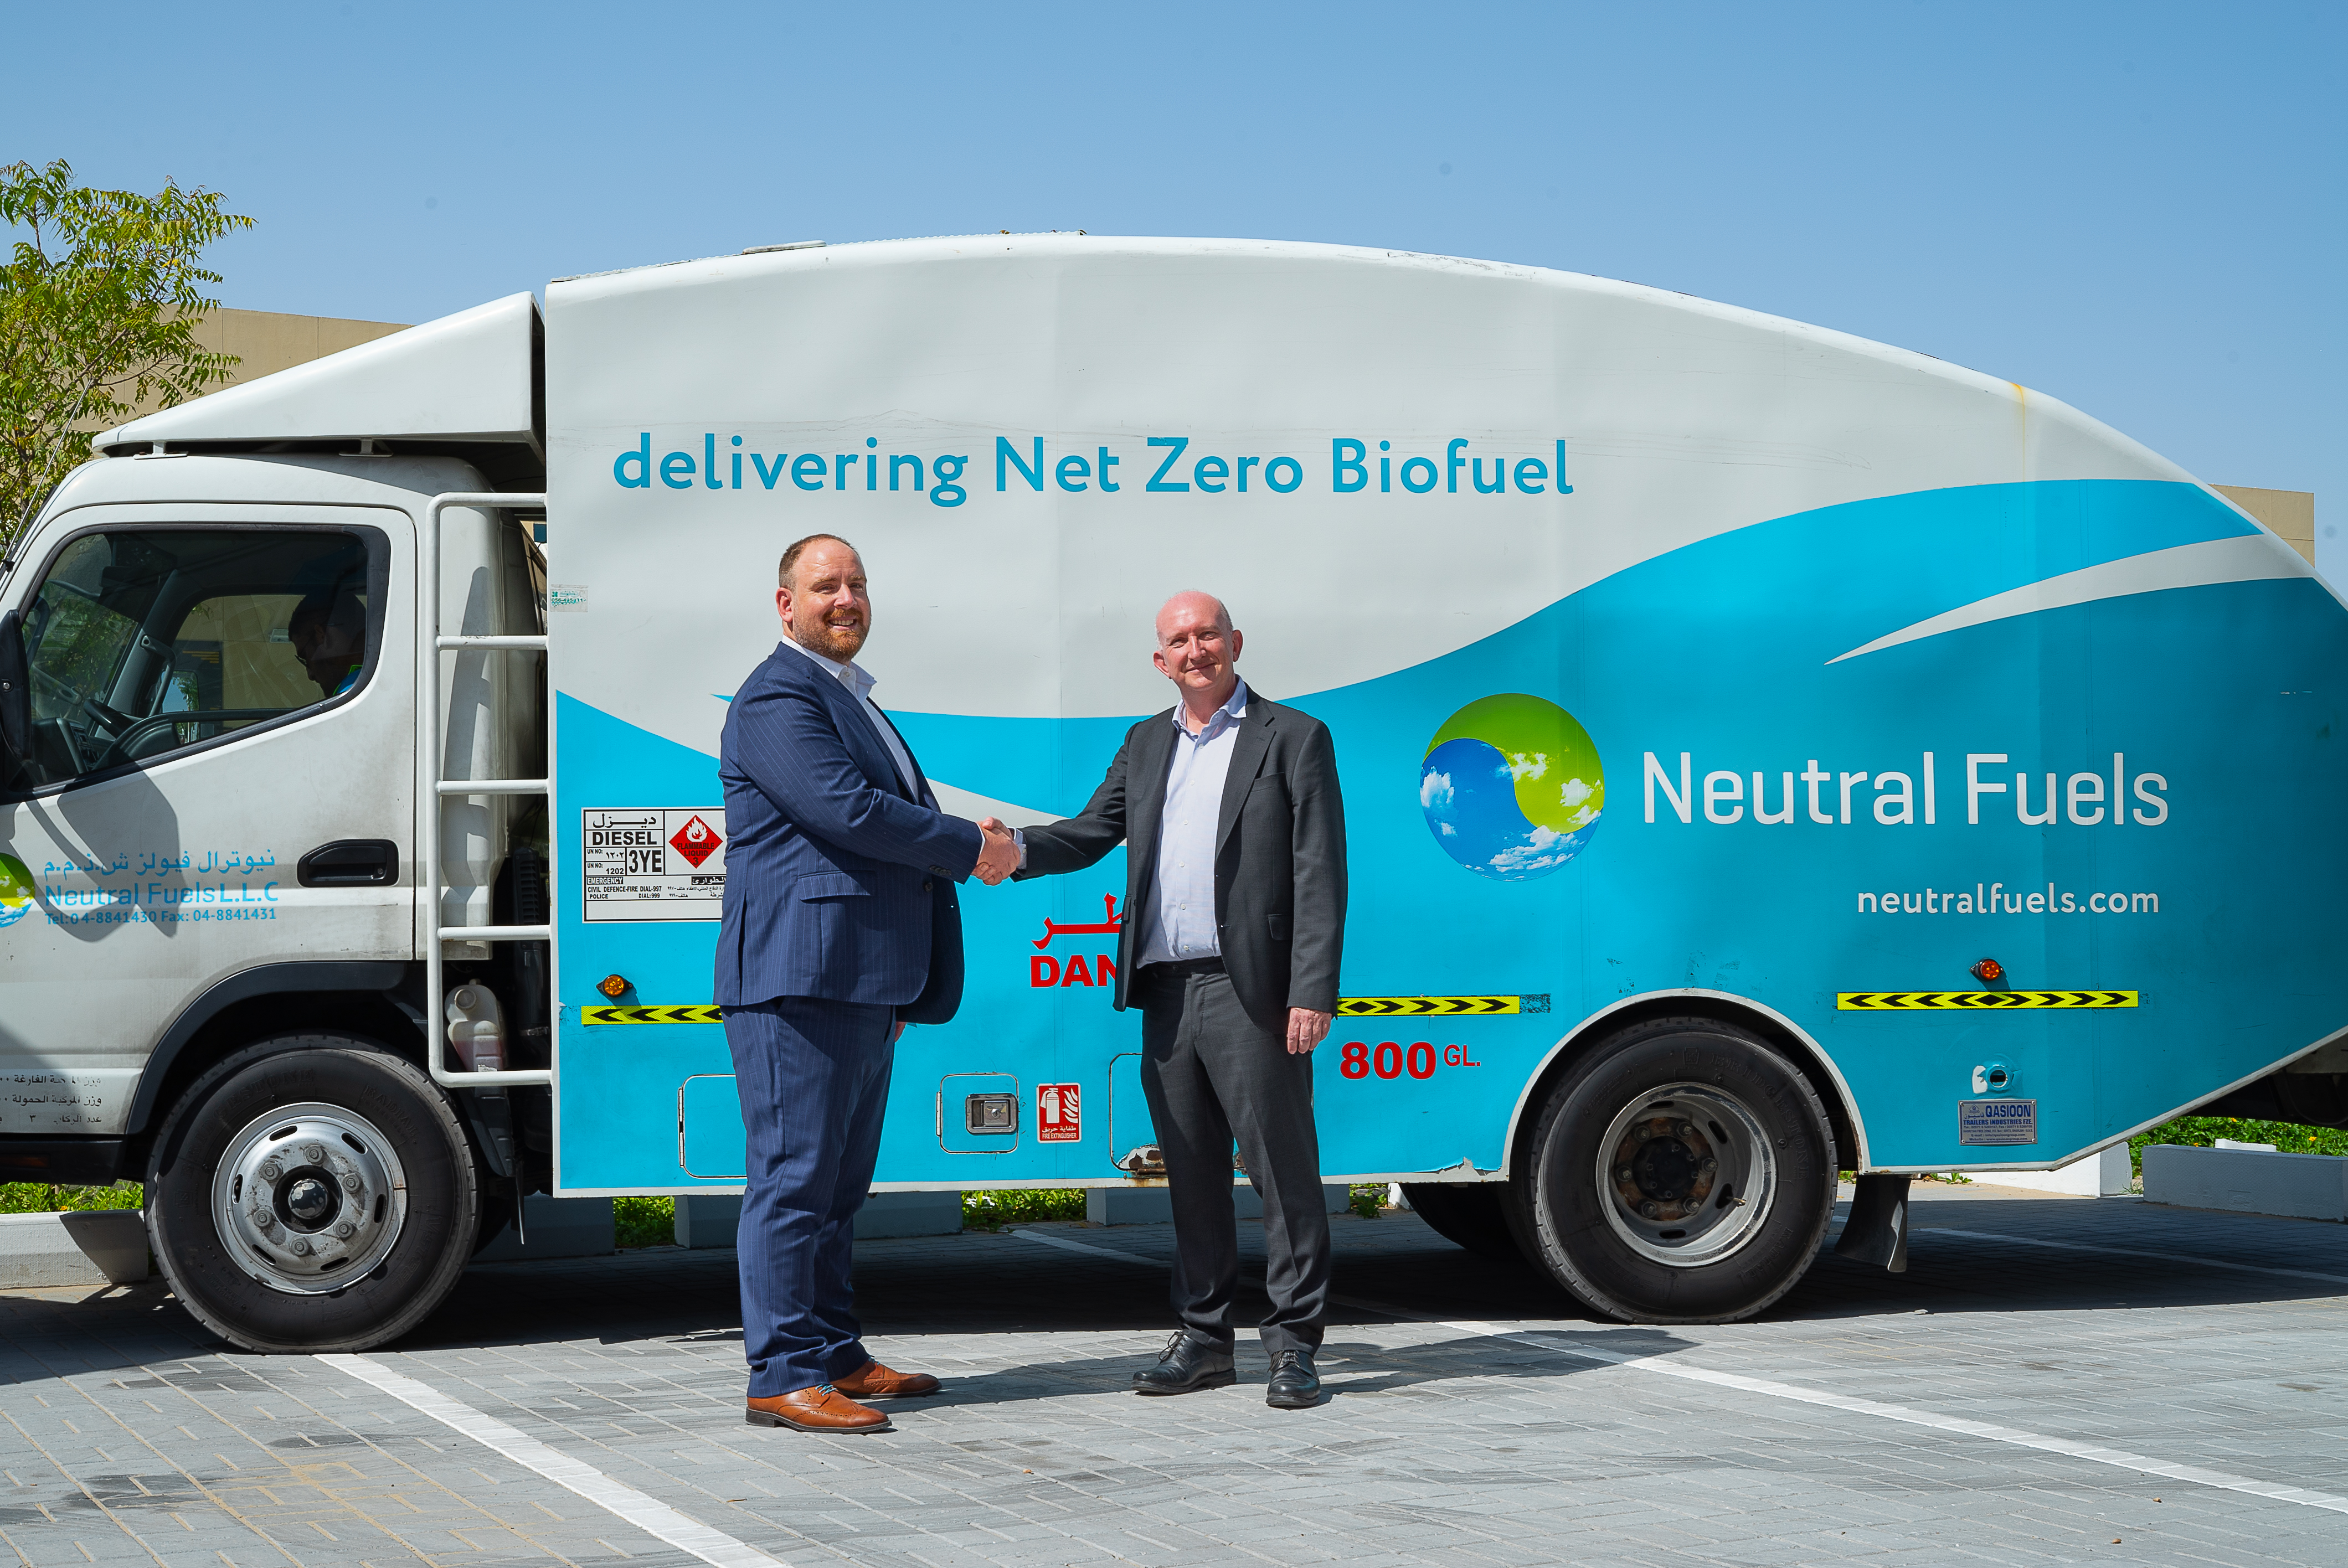 Jason Evans, GM Crown Middle East and Charles Gardner, COO, Neutral Fuels standing alongside a Neutral Fuels truck in Dubai, UAE 